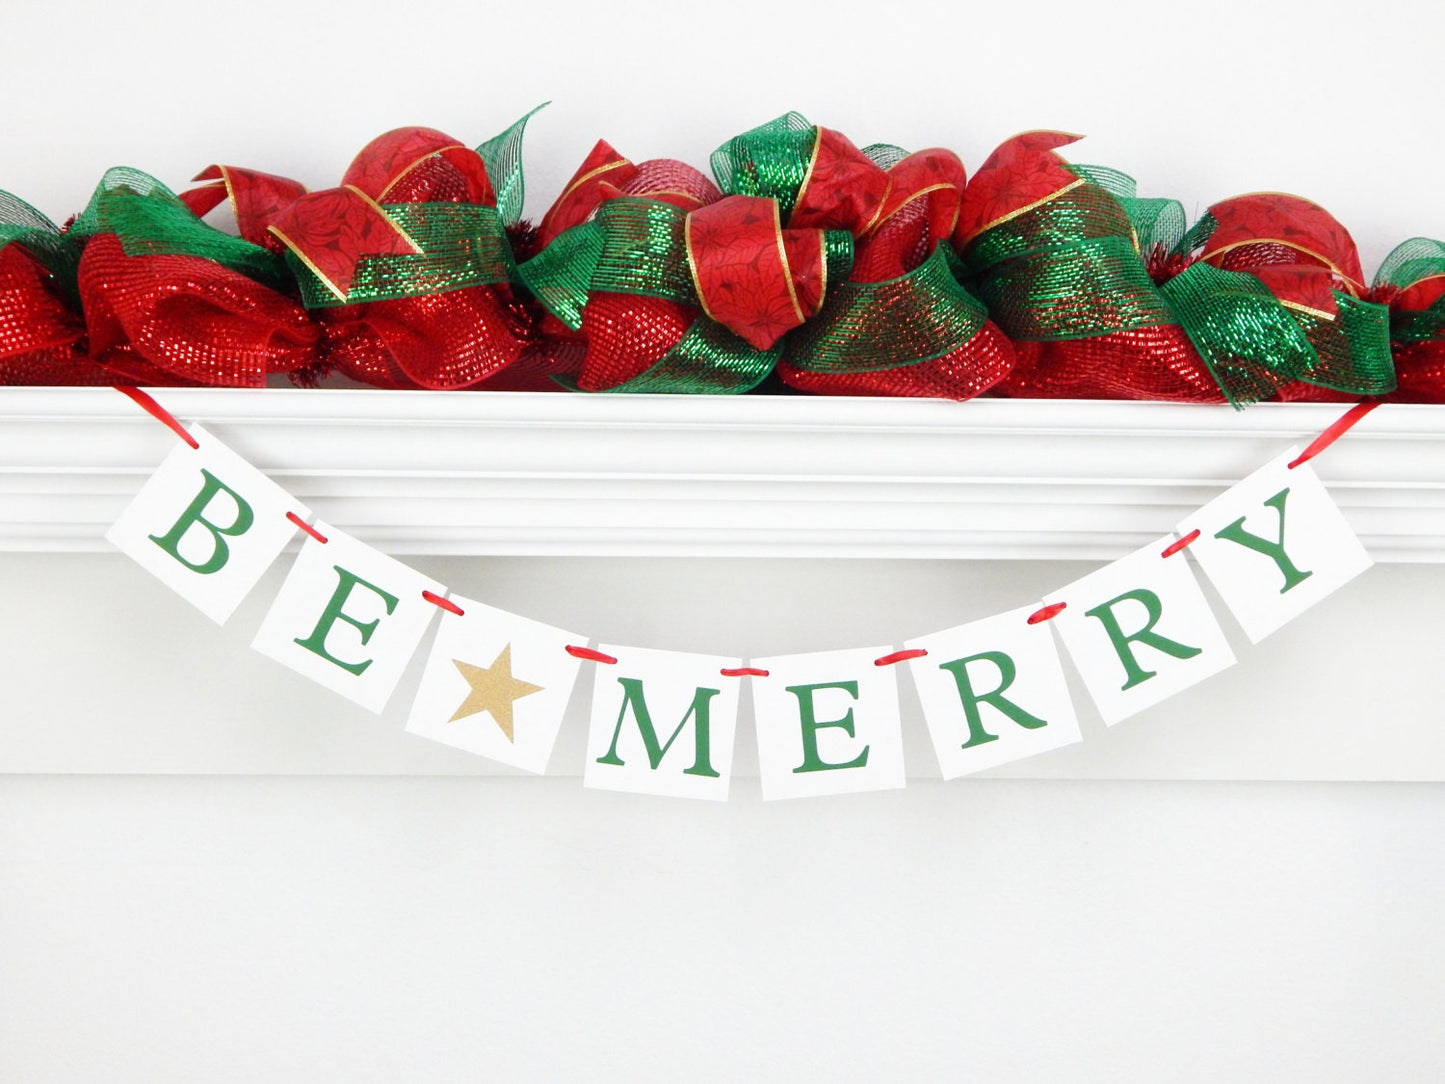 Be Merry Banner, holiday banner, cheerful holiday garland, Christmas decor, fireplace mantel decor, merry christmas banner